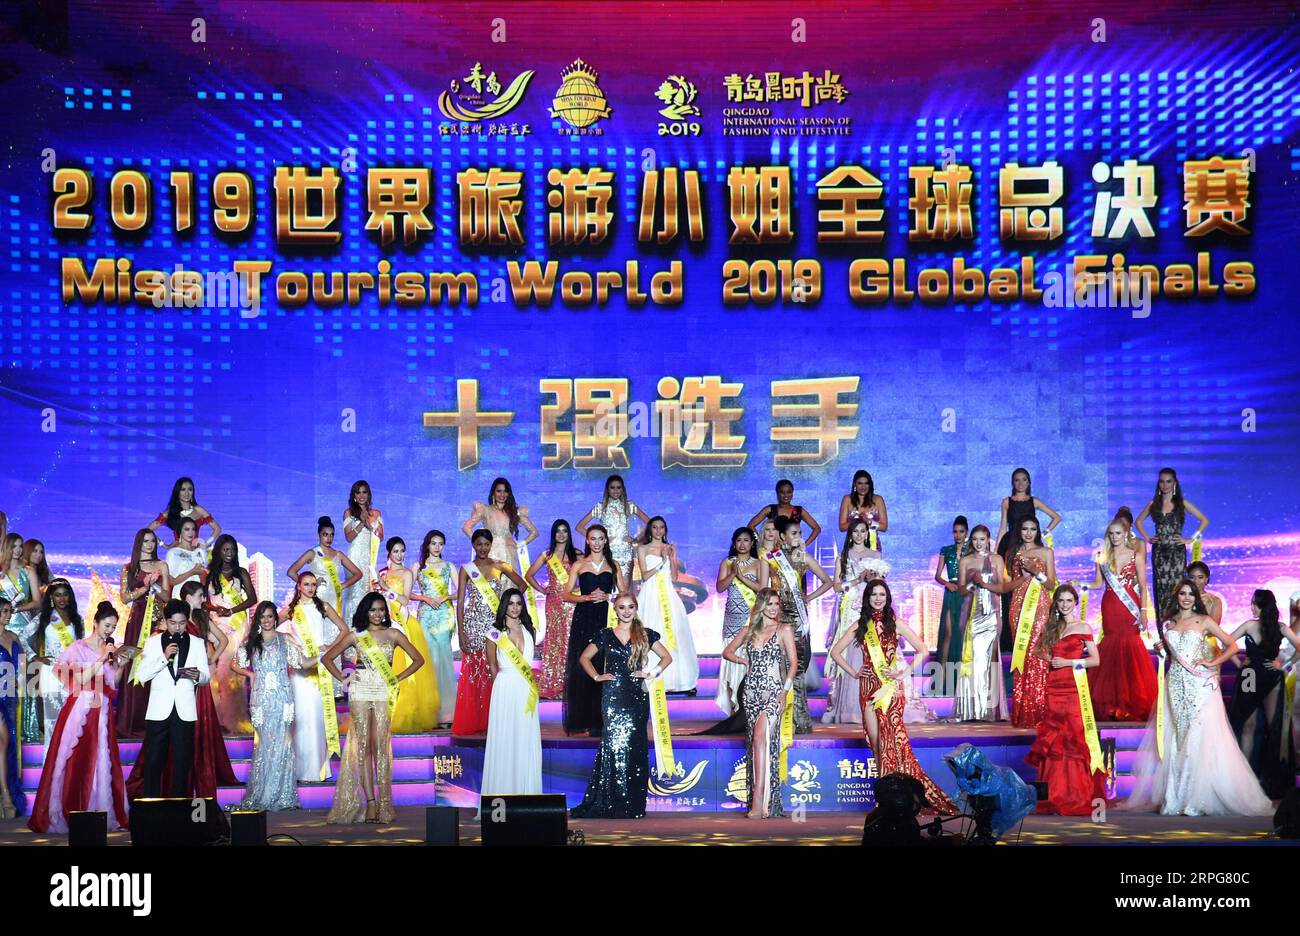 191007 -- QINGDAO, Oct. 7, 2019 -- Contestants are seen at the awarding ceremony during the Miss Tourism World 2019 Global Finals in Qingdao, east China s Shandong Province, Oct. 6, 2019. The beauty pageant concluded Sunday in the coastal city Qingdao, in which Miss Tourism Mexico Michelle Hewitt Zapata won the championship, Svetlana Mamaeva from Canada won the first runner-up, and Tan Ruoyi from China won the second runner-up. Contestants from over 60 countries and regions, including the United States, Venezuela, France, Brazil, SCO Shanghai Cooperation Organization member states as well as B Stock Photo